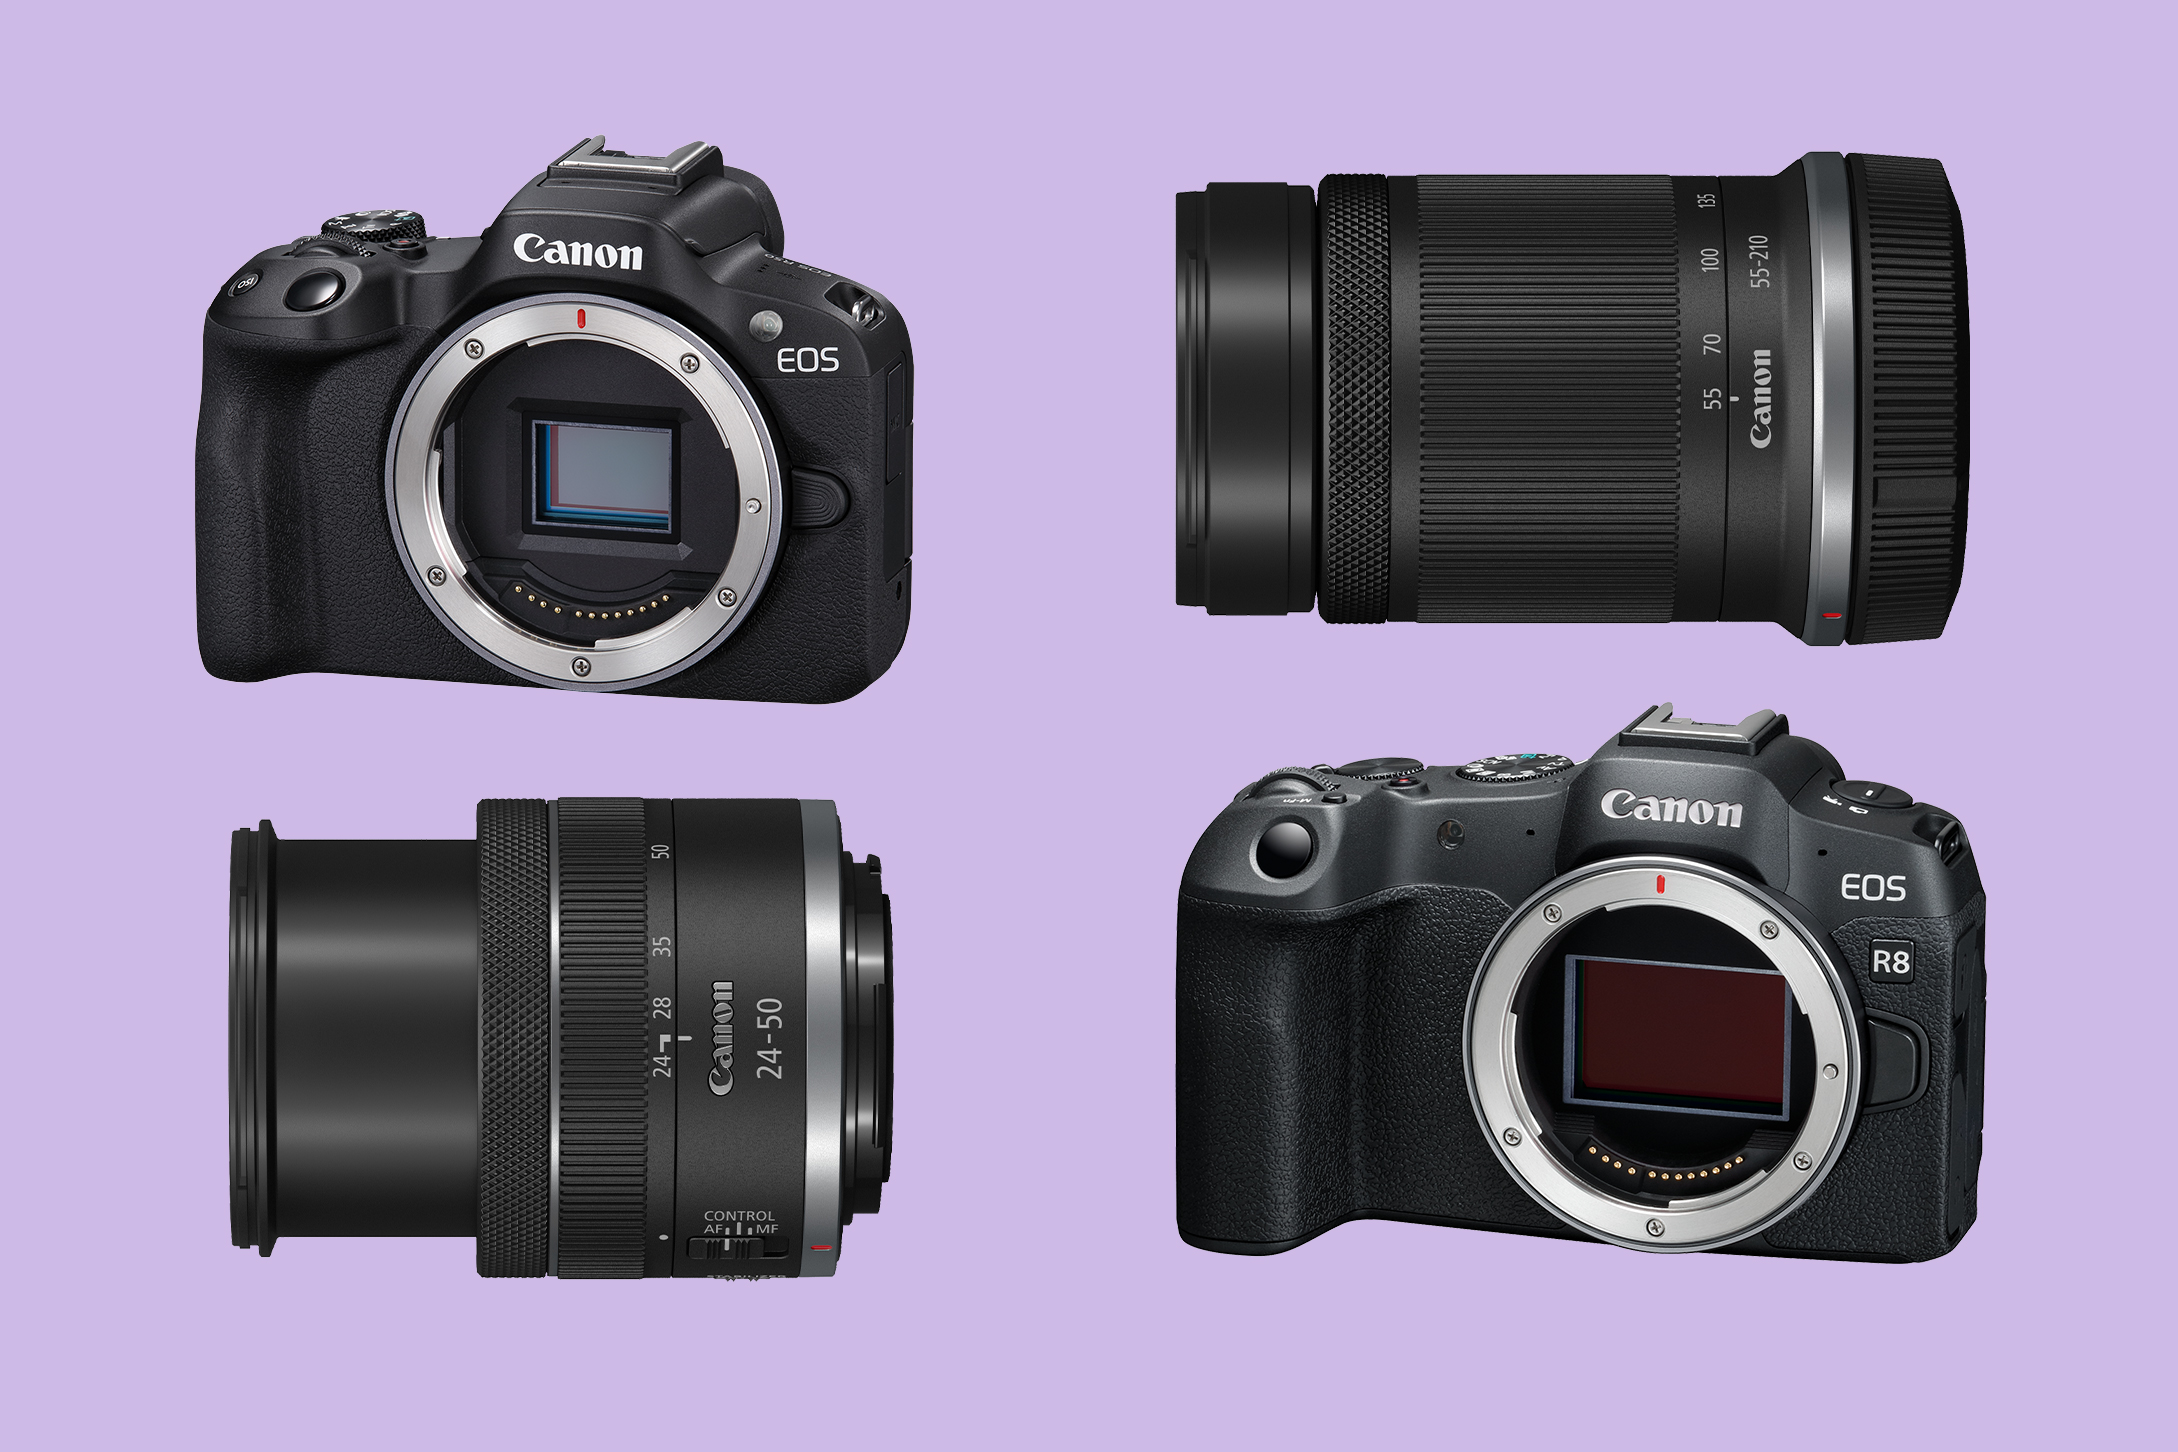  Canon EOS R8 Full-Frame Mirrorless Camera w/RF24-50mm F4.5-6.3  IS STM Lens, 24.2 MP, 4K Video, DIGIC X Image Processor, Subject Detection  & Tracking, Compact, Smartphone Connection, Content Creator : Electronics